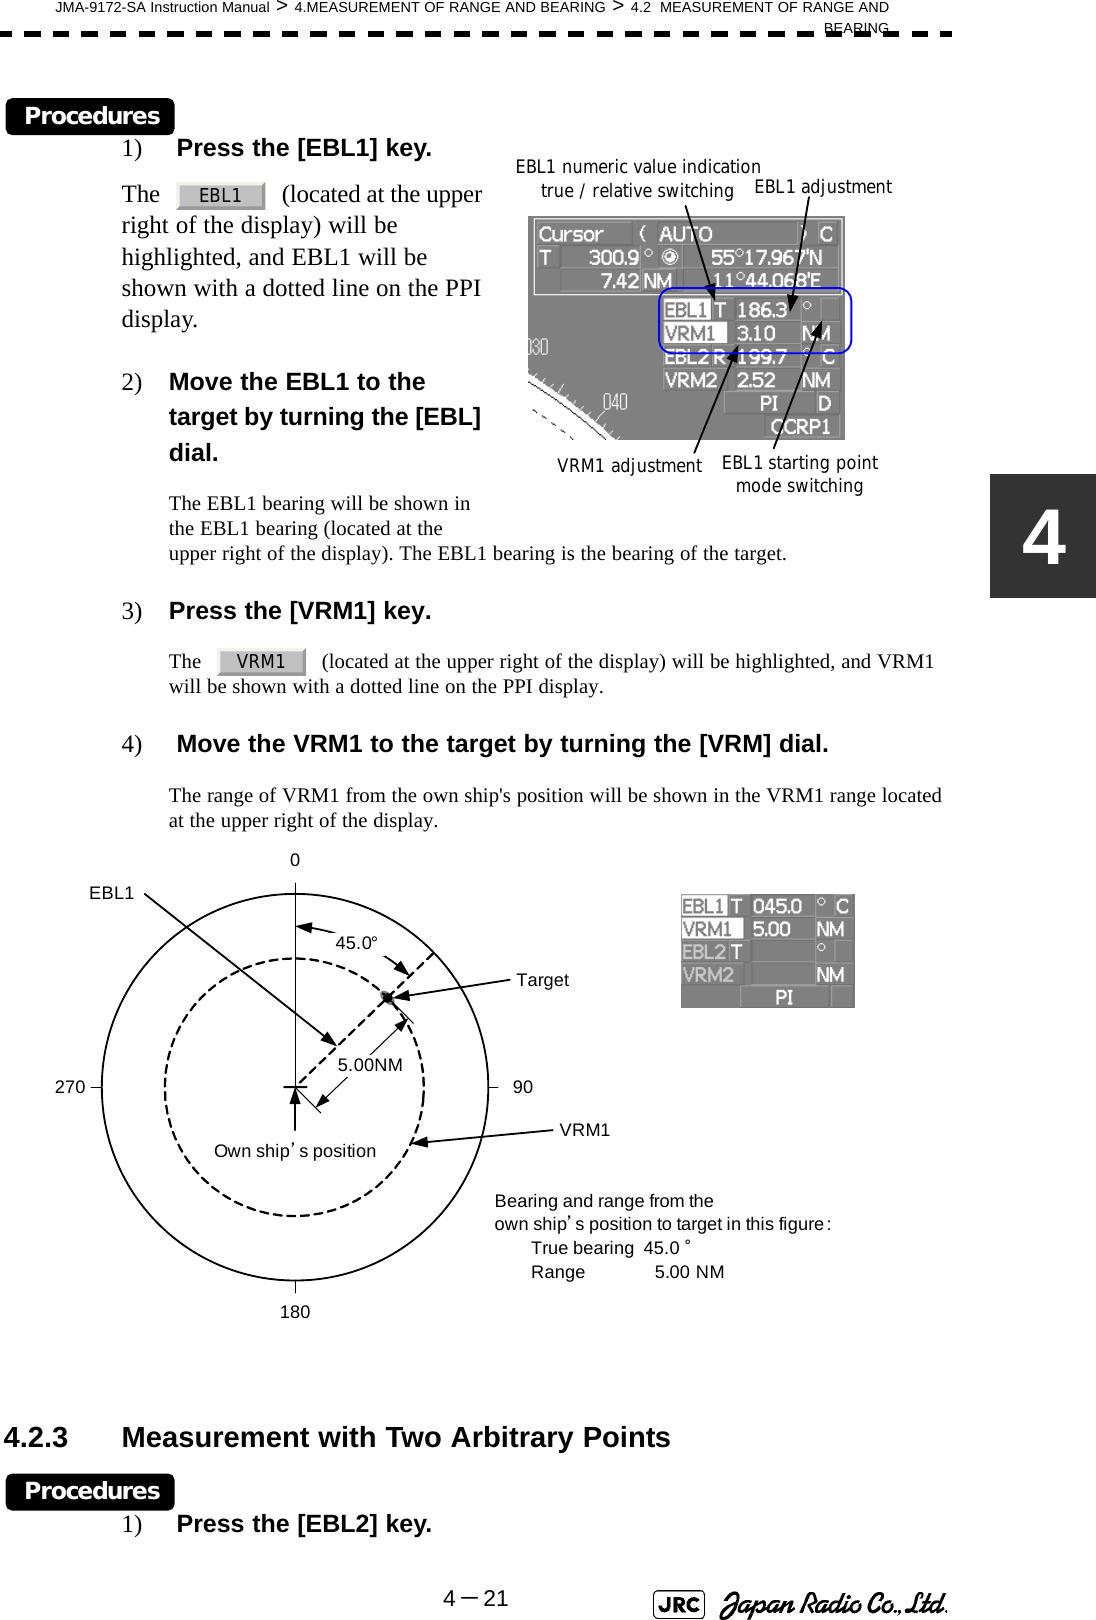 JMA-9172-SA Instruction Manual &gt; 4.MEASUREMENT OF RANGE AND BEARING &gt; 4.2  MEASUREMENT OF RANGE ANDBEARING4－214Procedures1)  Press the [EBL1] key.The     (located at the upper right of the display) will be highlighted, and EBL1 will be shown with a dotted line on the PPI display.2) Move the EBL1 to the target by turning the [EBL] dial.The EBL1 bearing will be shown in the EBL1 bearing (located at the upper right of the display). The EBL1 bearing is the bearing of the target.3) Press the [VRM1] key.The     (located at the upper right of the display) will be highlighted, and VRM1 will be shown with a dotted line on the PPI display.4)  Move the VRM1 to the target by turning the [VRM] dial.The range of VRM1 from the own ship&apos;s position will be shown in the VRM1 range located at the upper right of the display.4.2.3 Measurement with Two Arbitrary PointsProcedures1)  Press the [EBL2] key.EBL1 adjustmentVRM1 adjustmentEBL1 numeric value indication true / relative switchingEBL1 starting point mode switchingEBL1VRM1TargetEBL11800 90270VRM15.00NMBearing and range from theown ship’s position to target in this figure:True bearing  45.0 °Range 5.00 NM45.0°Own ship’s position